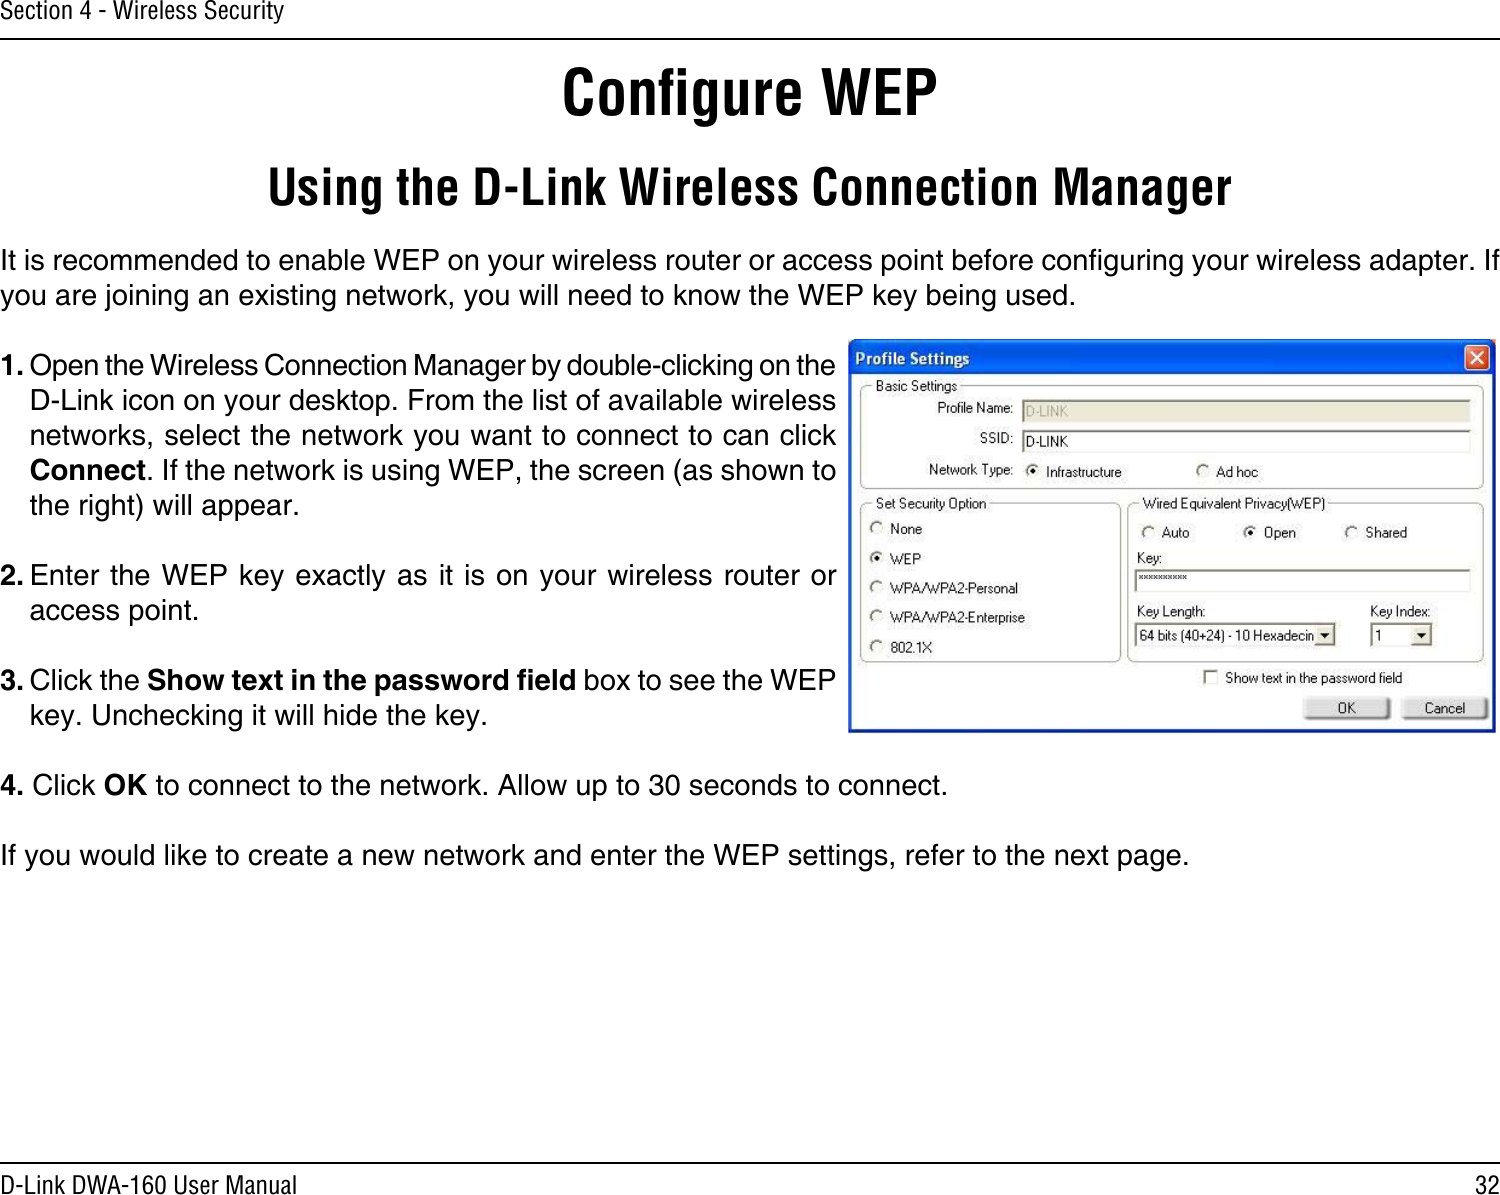 32D-Link DWA-160 User ManualSection 4 - Wireless SecurityConﬁgure WEPUsing the D-Link Wireless Connection ManagerIt is recommended to enable WEP on your wireless router or access point before conguring your wireless adapter. If you are joining an existing network, you will need to know the WEP key being used.1. Open the Wireless Connection Manager by double-clicking on the D-Link icon on your desktop. From the list of available wireless networks, select the network you want to connect to can click Connect. If the network is using WEP, the screen (as shown to the right) will appear. 2. Enter the WEP key exactly as it is on your wireless router or access point.3. Click the Show text in the password eld box to see the WEP key. Unchecking it will hide the key.4. Click OK to connect to the network. Allow up to 30 seconds to connect. If you would like to create a new network and enter the WEP settings, refer to the next page.